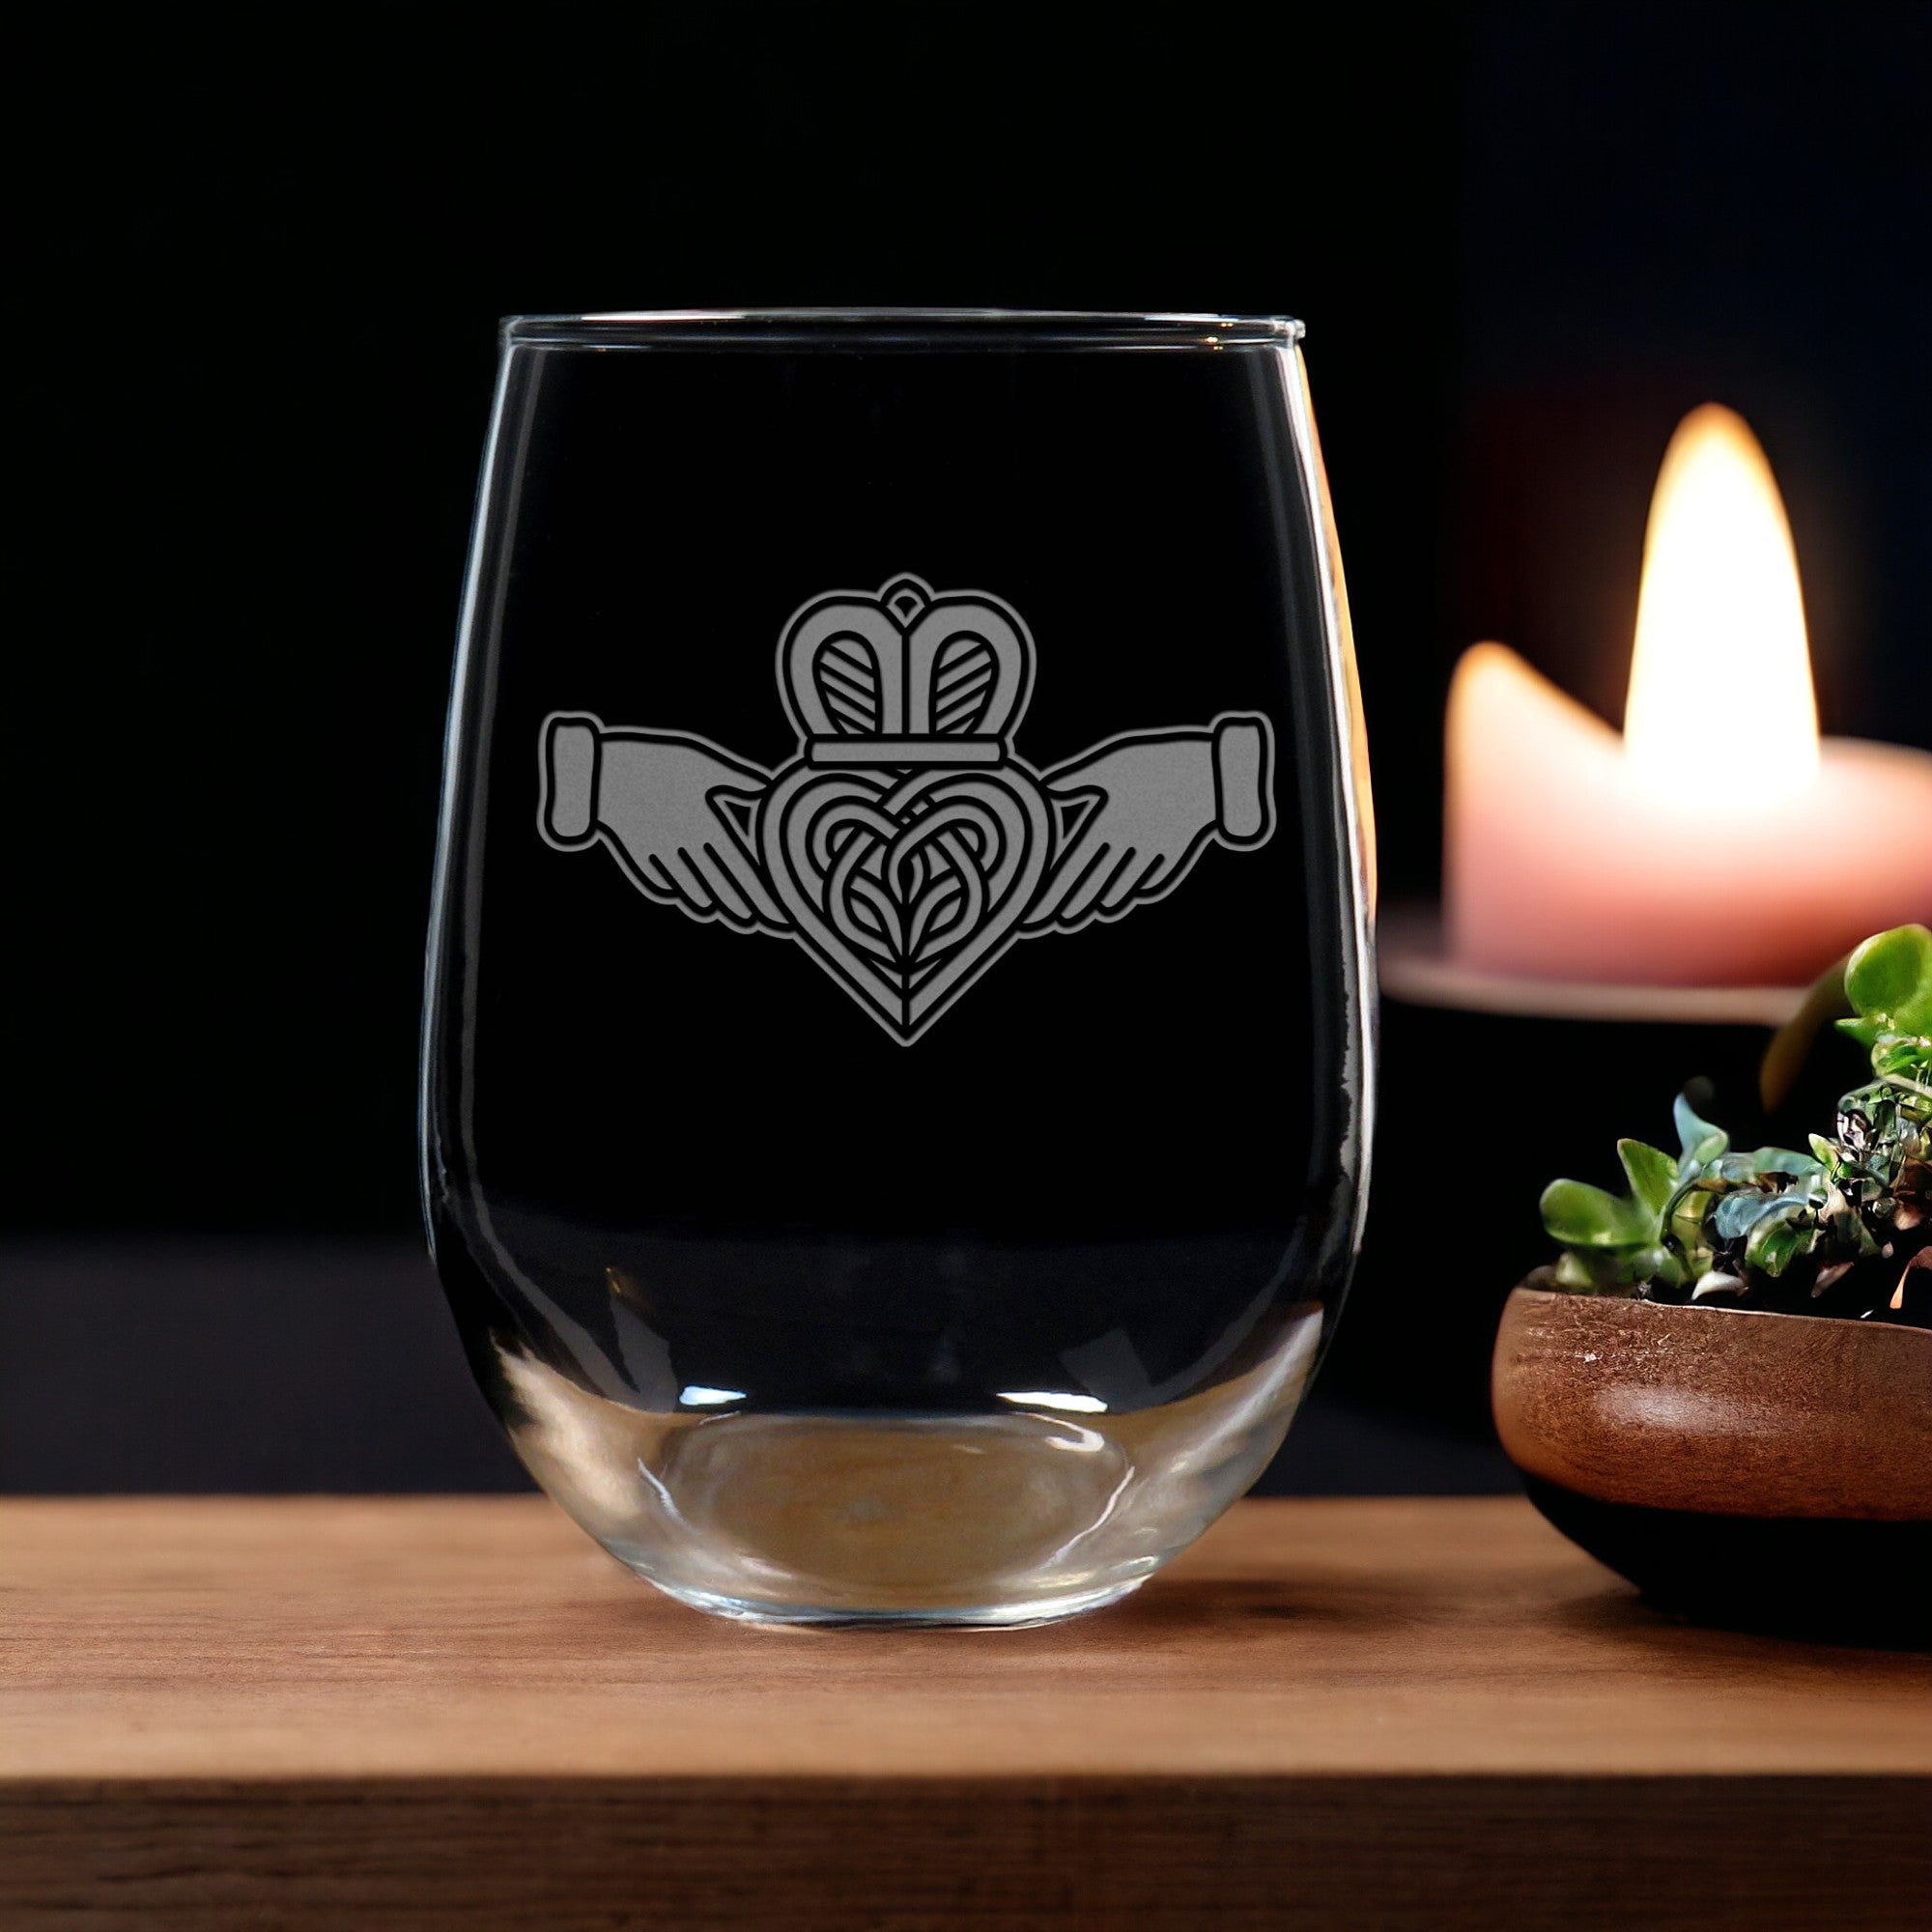 Celtic Claddagh Stemless Wine Glass - Copyright Hues in Glass